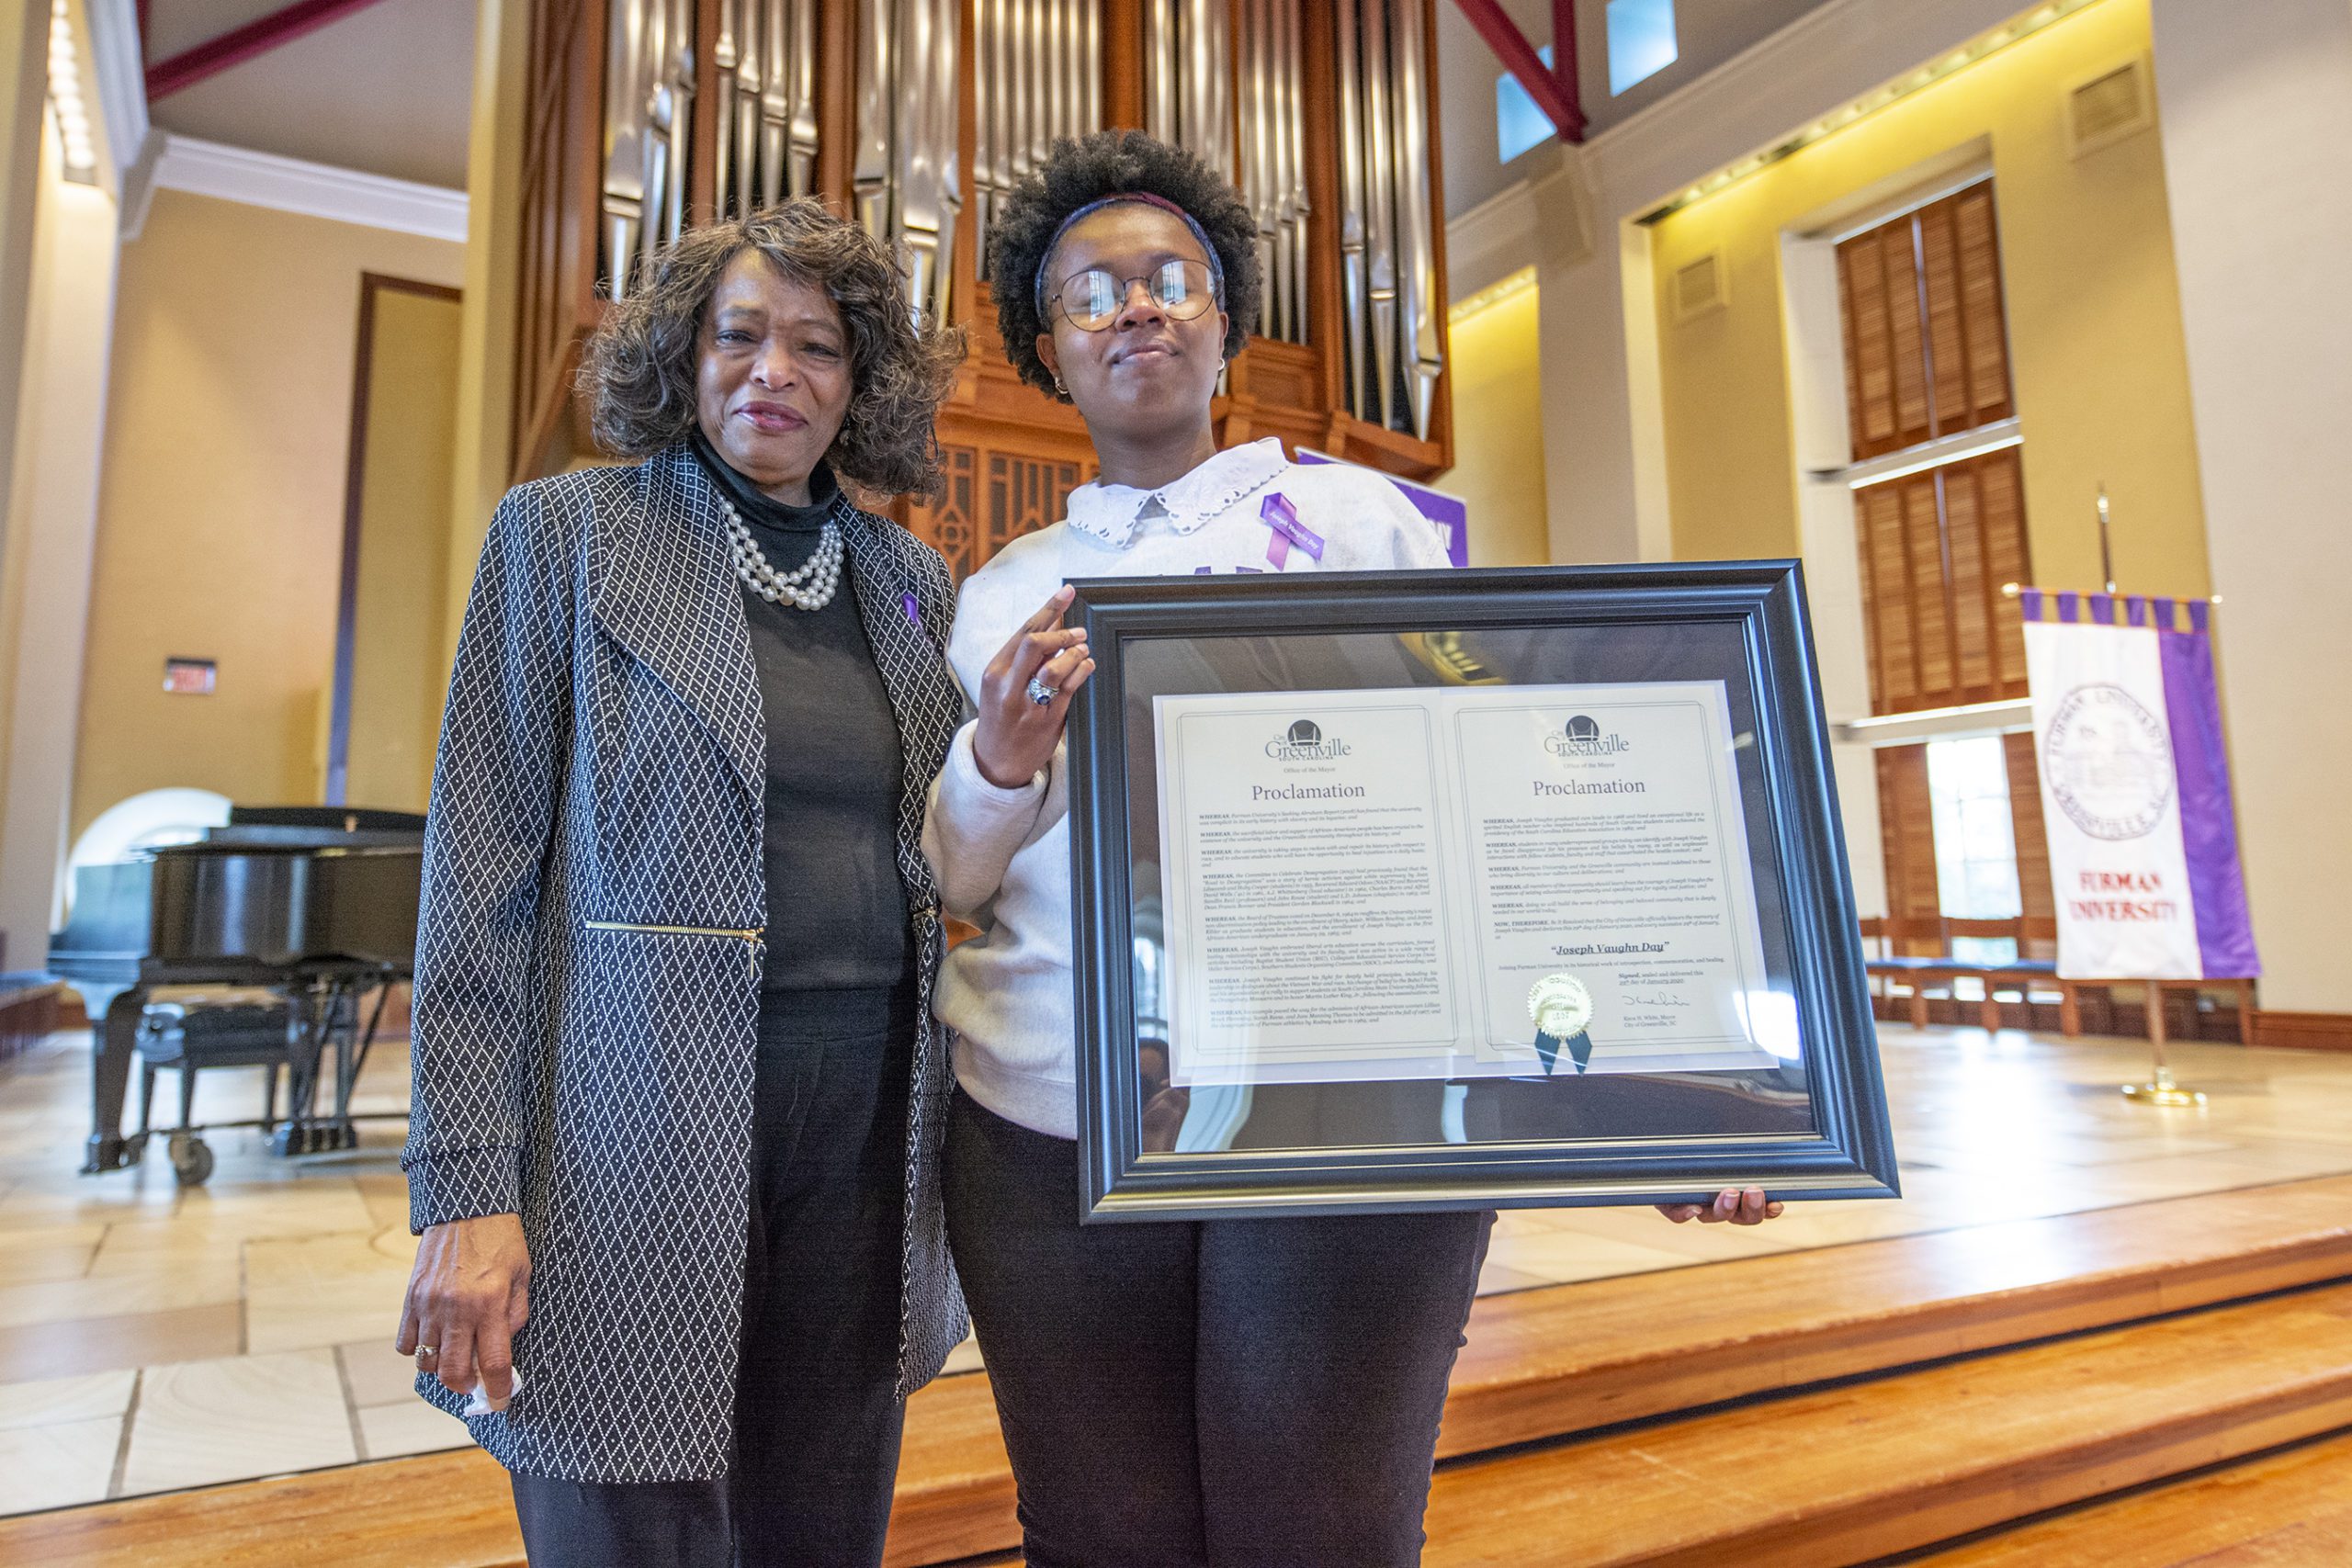 Adare Smith '20 holds a framed print of the city of Greenville's Joseph Vaughn Day Proclamation with Lillian Brock Flemming '71 to her left